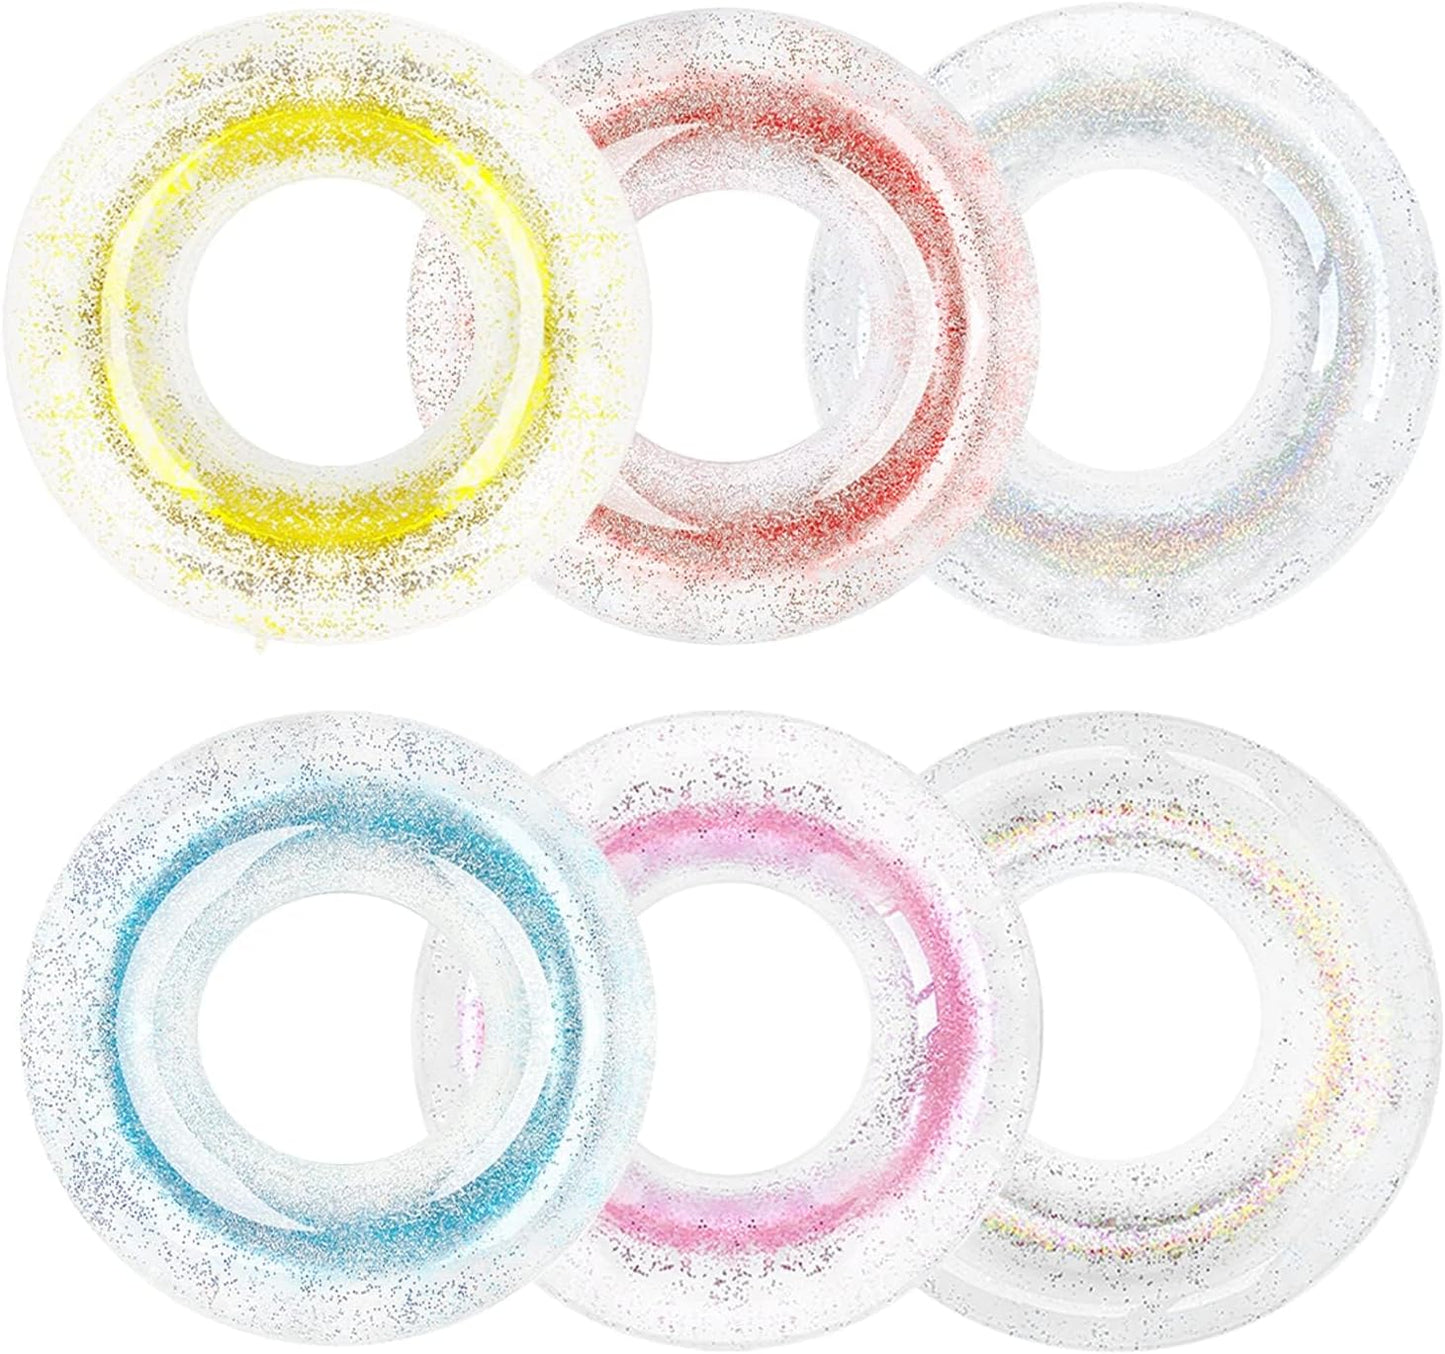 Pool Floats, Glitter Pool Float with Confetti, Summer Pool Floats Tube Pool Toys Summer Beach Party, Transparent Inflatable Floating Tubes for Adults and Kids (Multicolor)